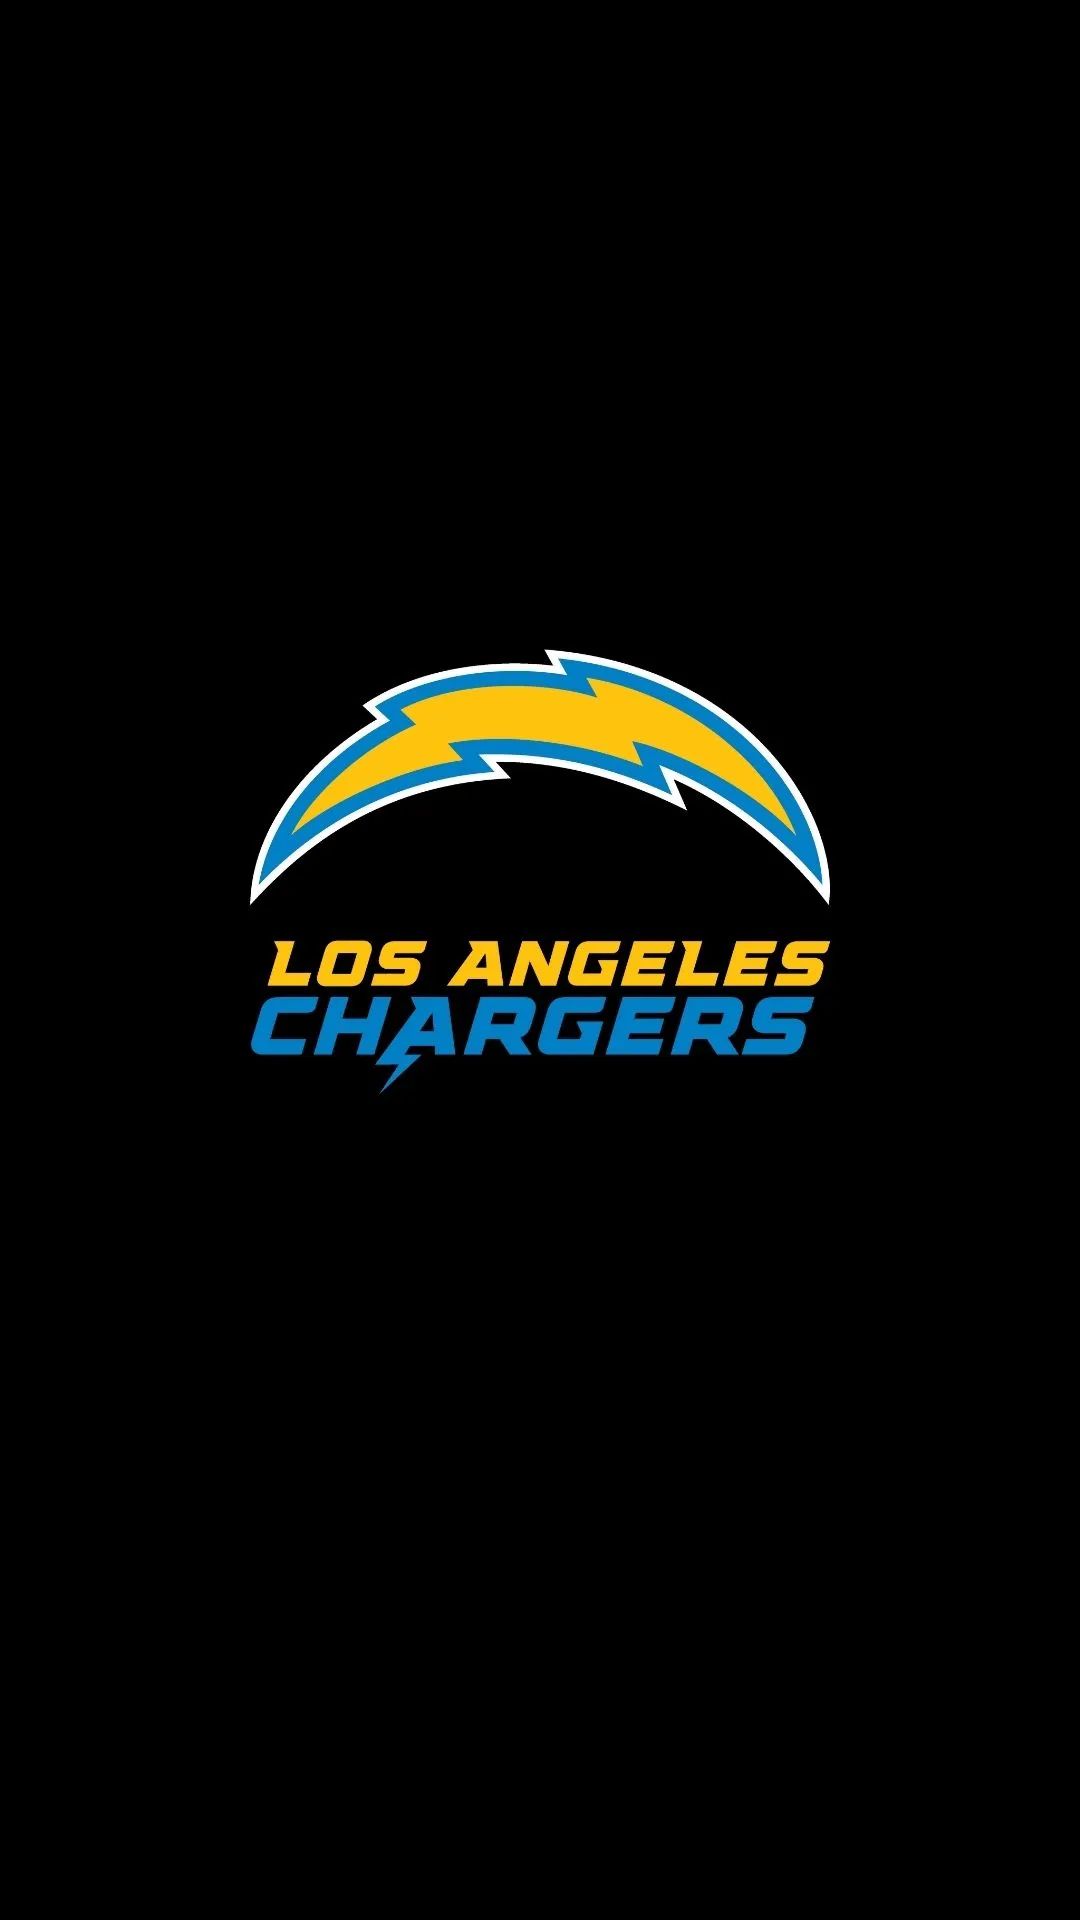 Los Angeles Chargers Logo Pictures